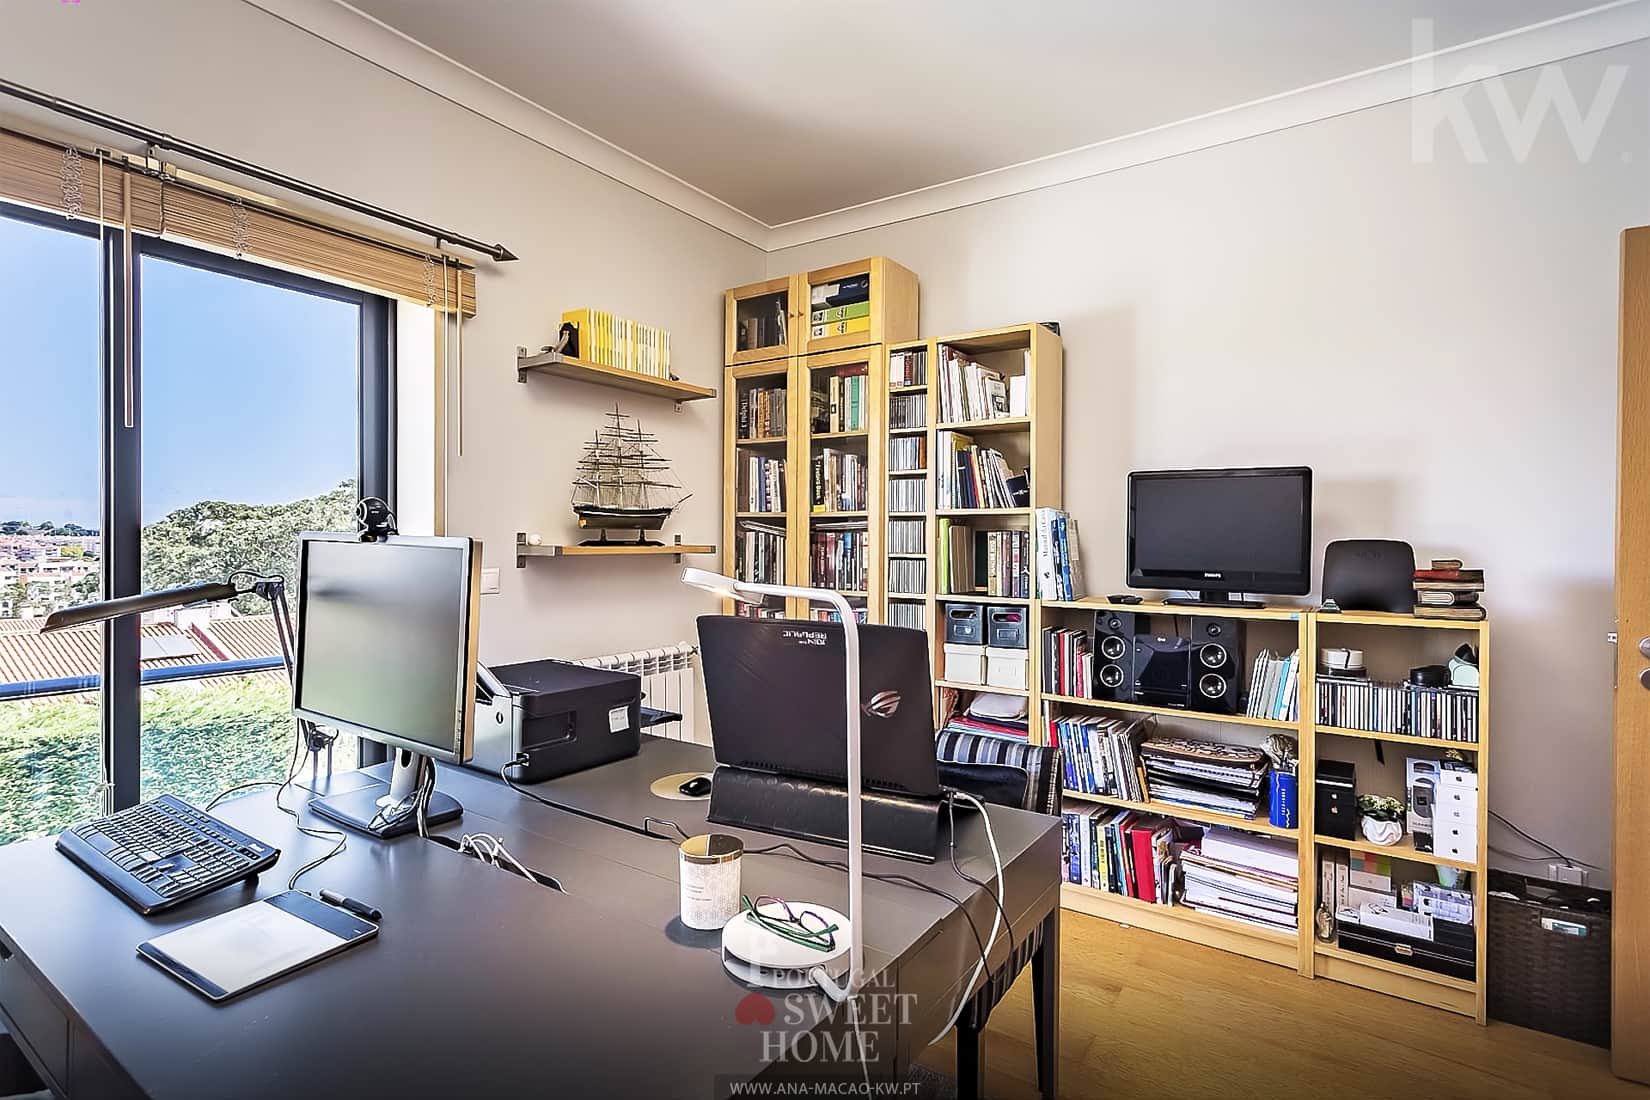 Bedroom / Office (13.35 m²) with open view